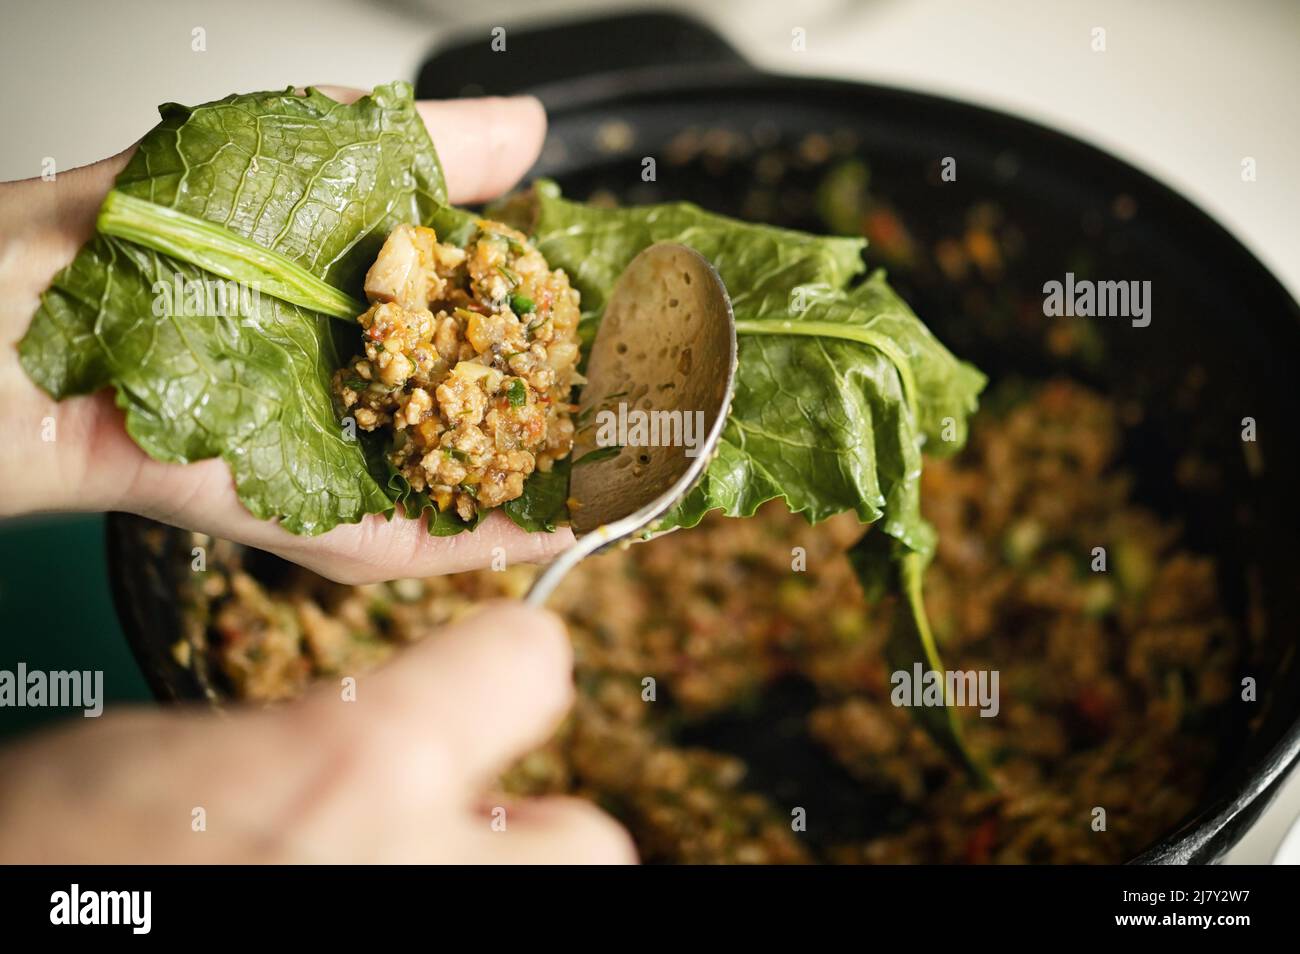 Closeup Stuffed Patience dock leaves with Beef, Rice And Vegetables Stock Photo